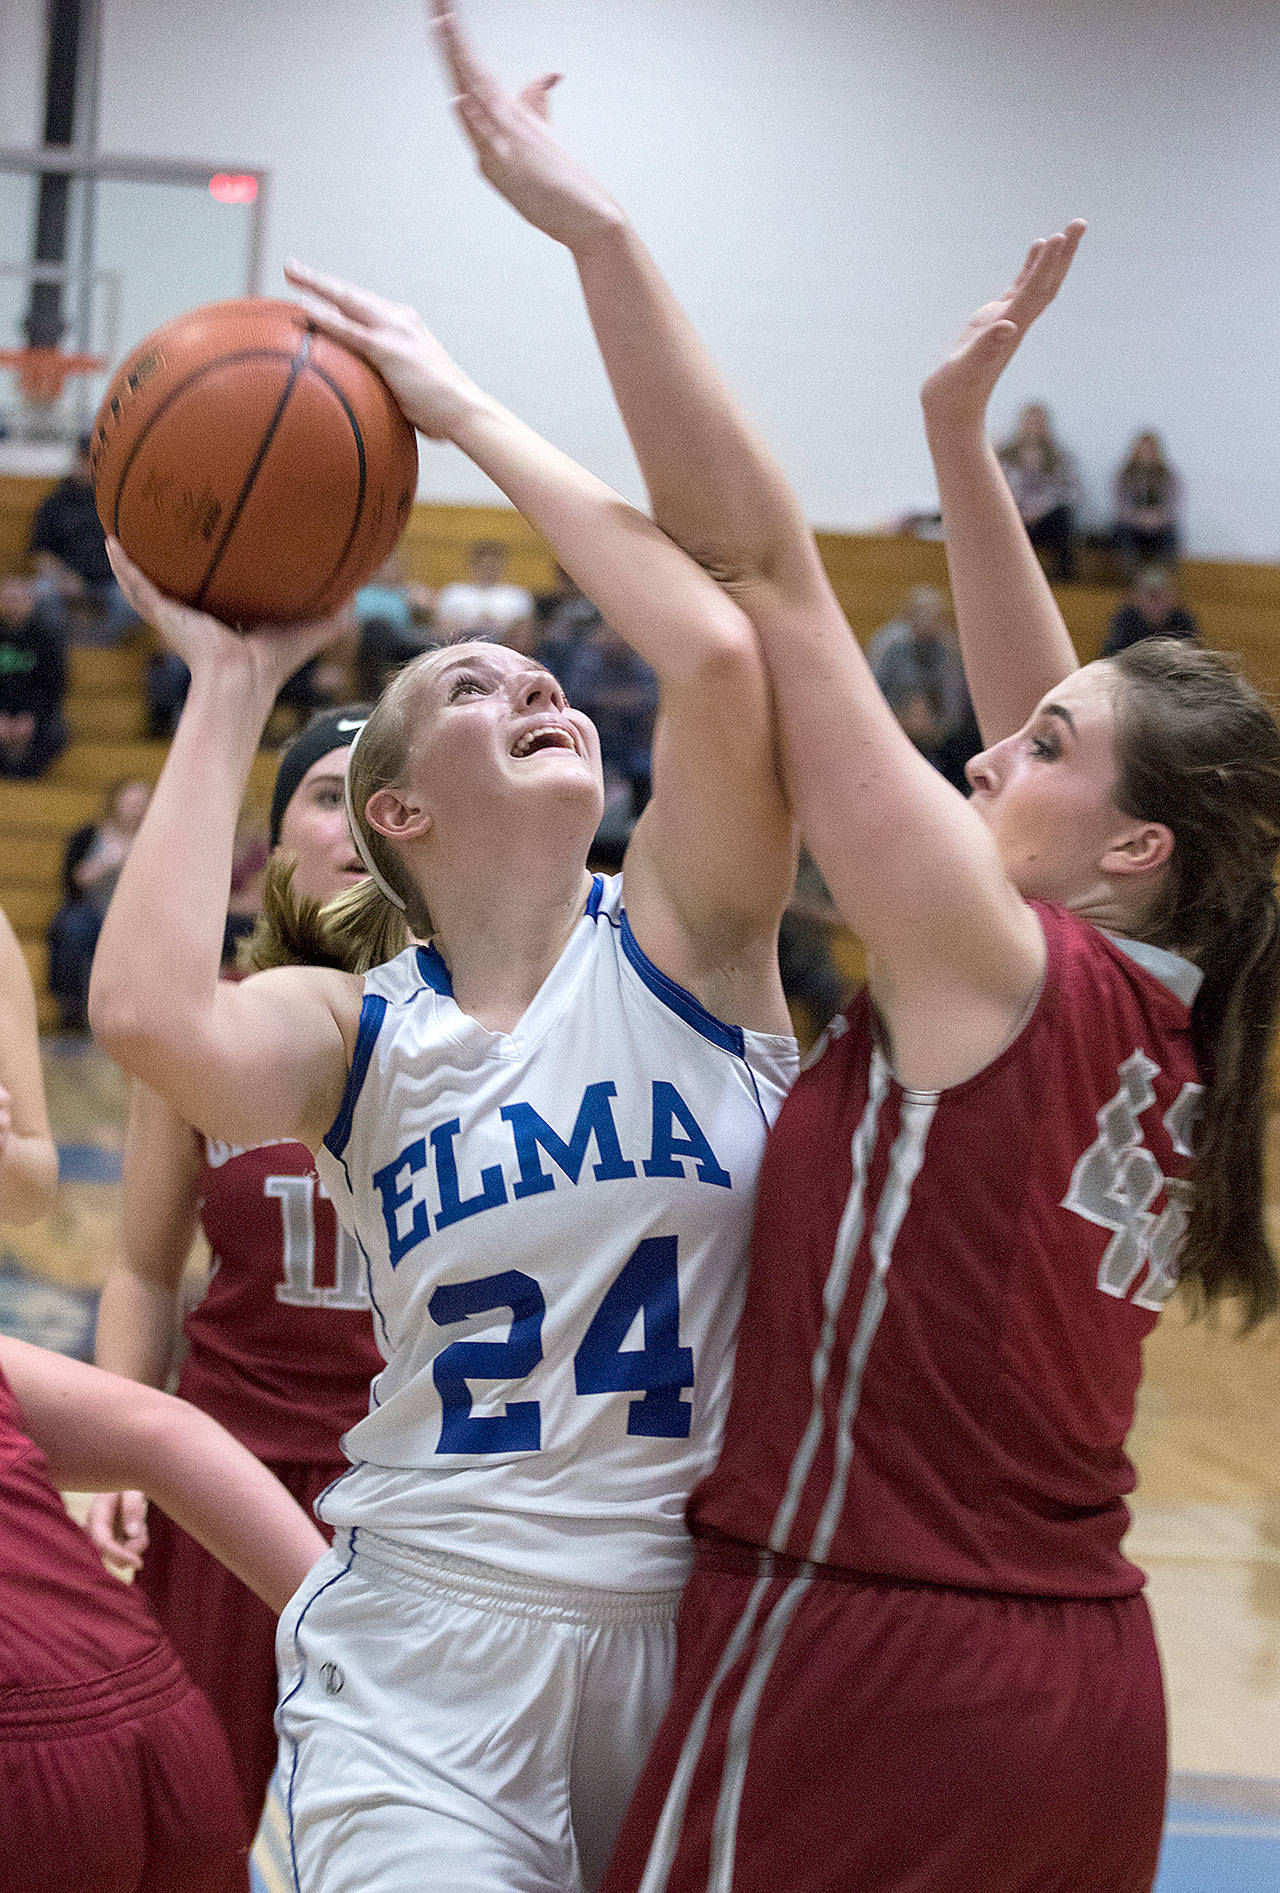 Elma’s Molly Johnston works to try and get around Hoquiam’s Rylee Vonhof on her way to the hoop on Friday. (Brendan Carl Photography)